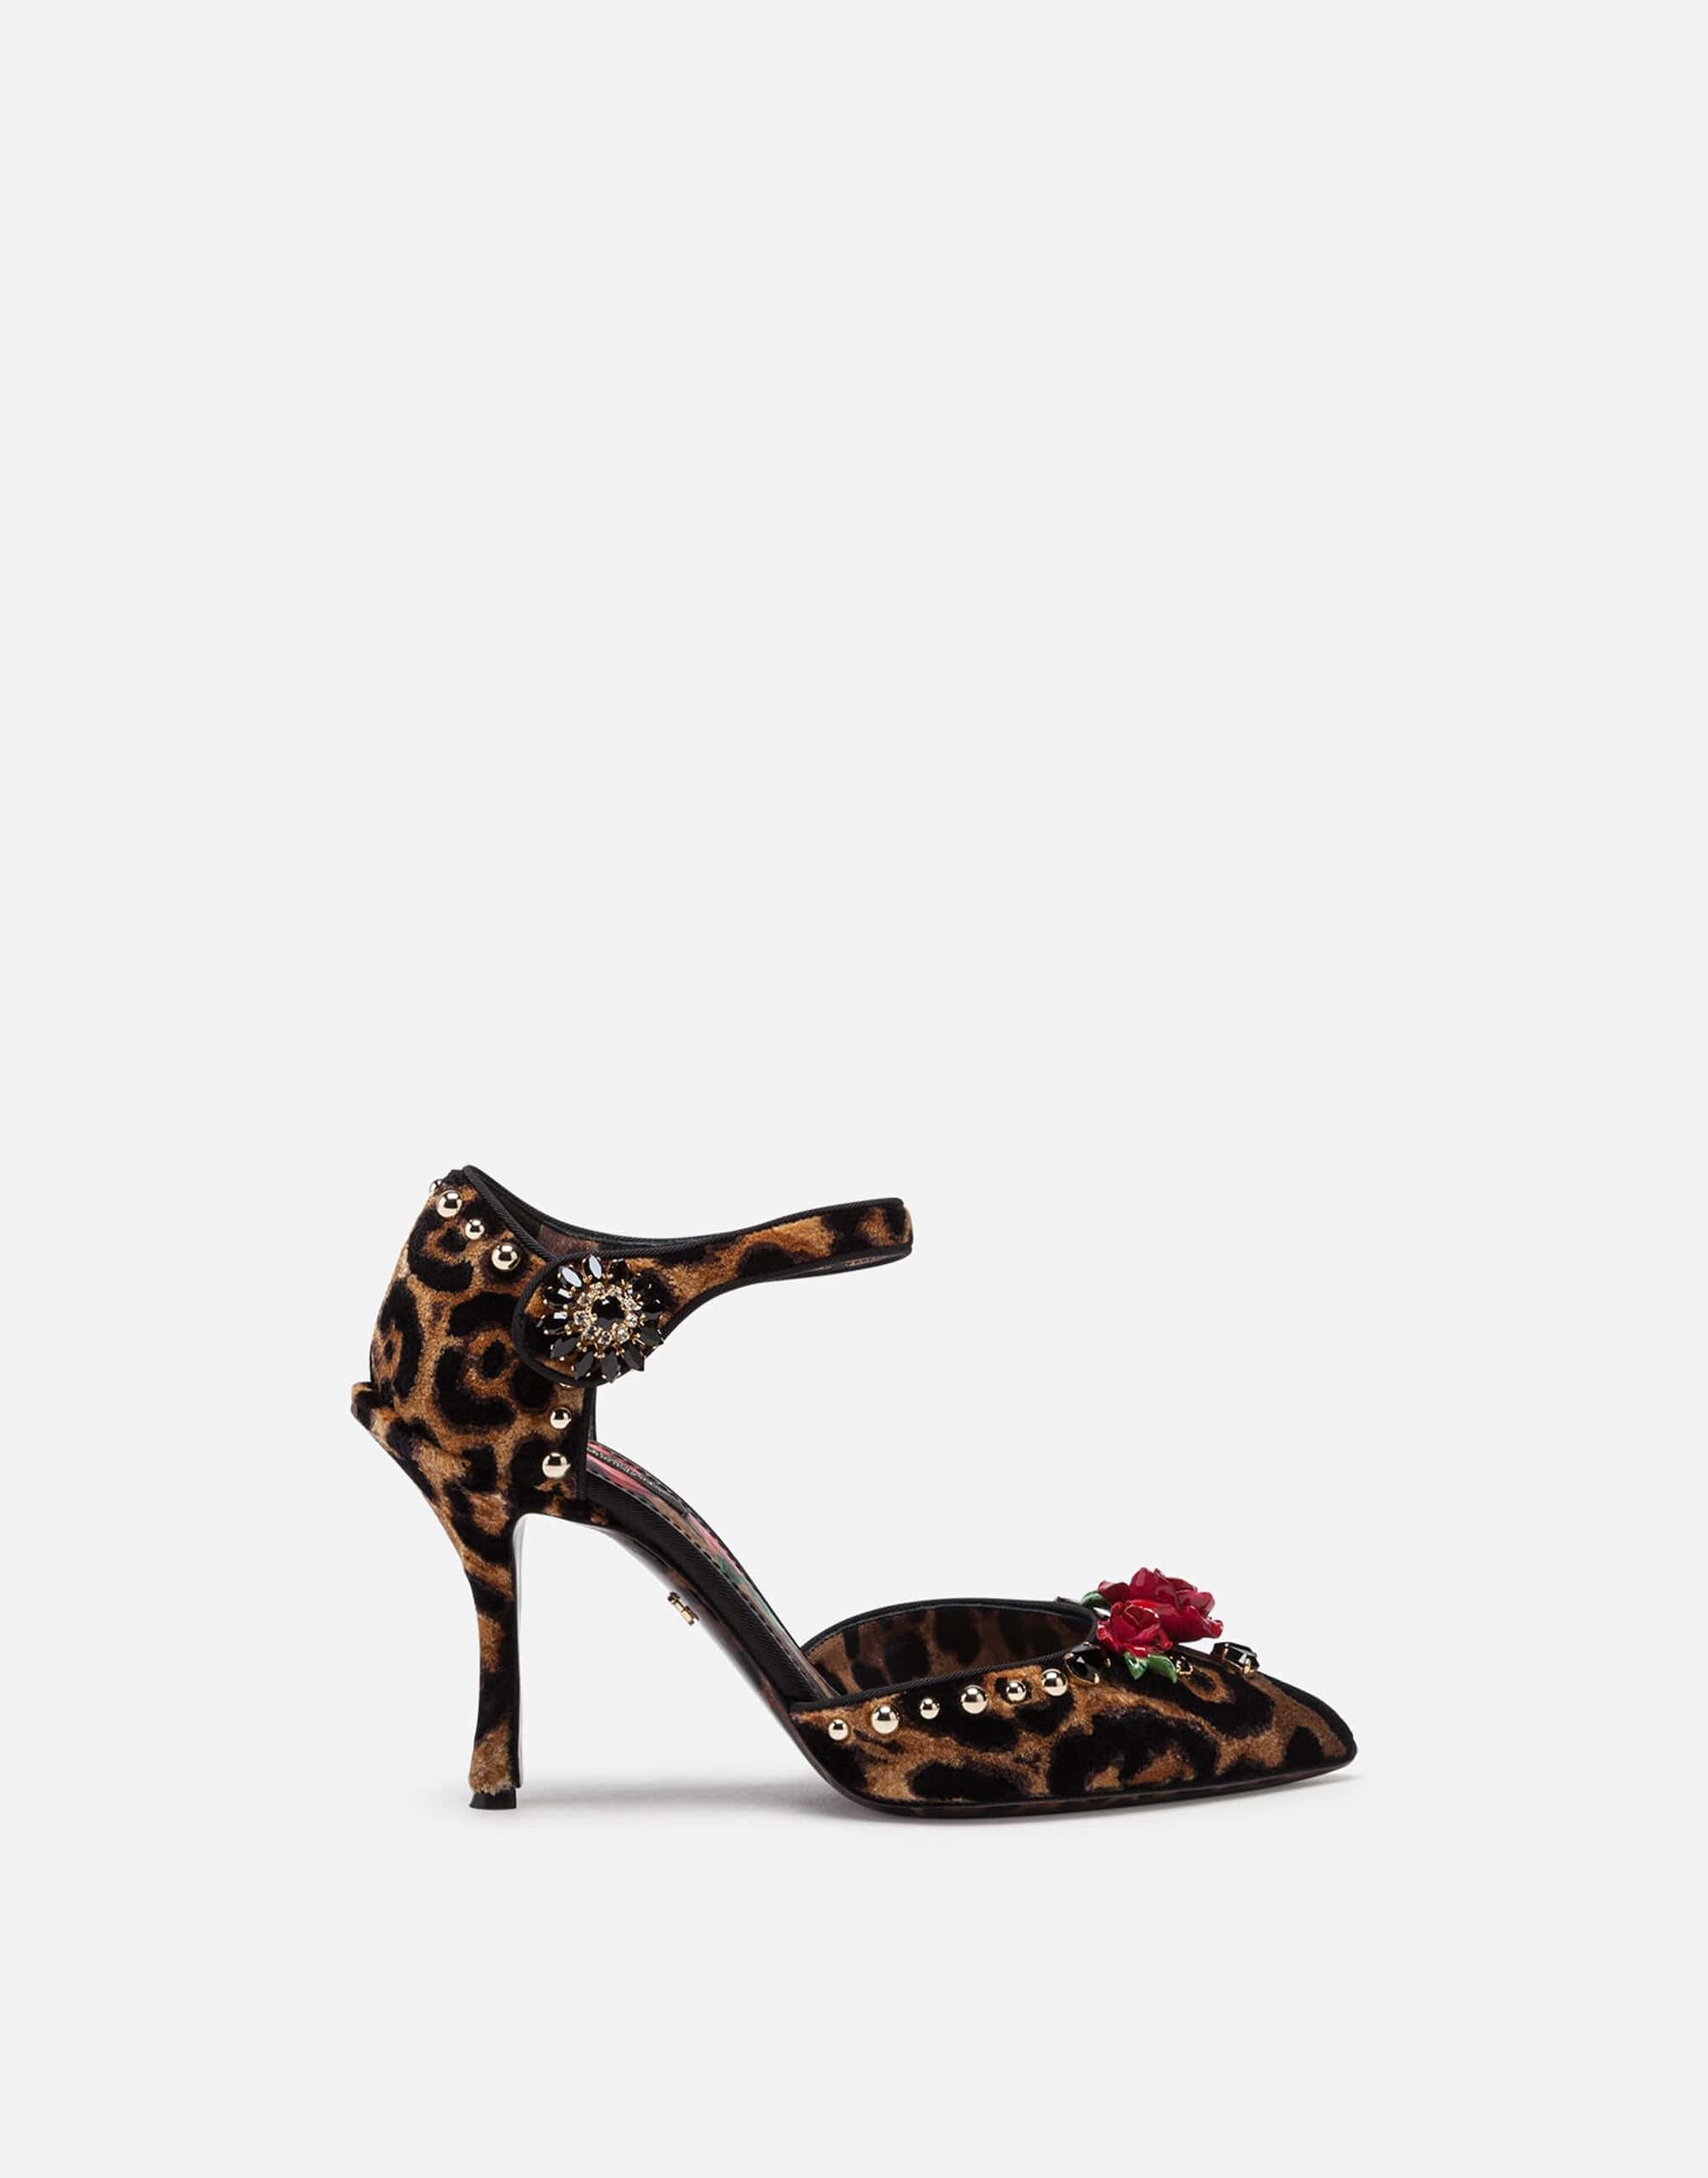 Dolce & Gabbana Black Red Floral Mary Janes Pumps Women's Shoes